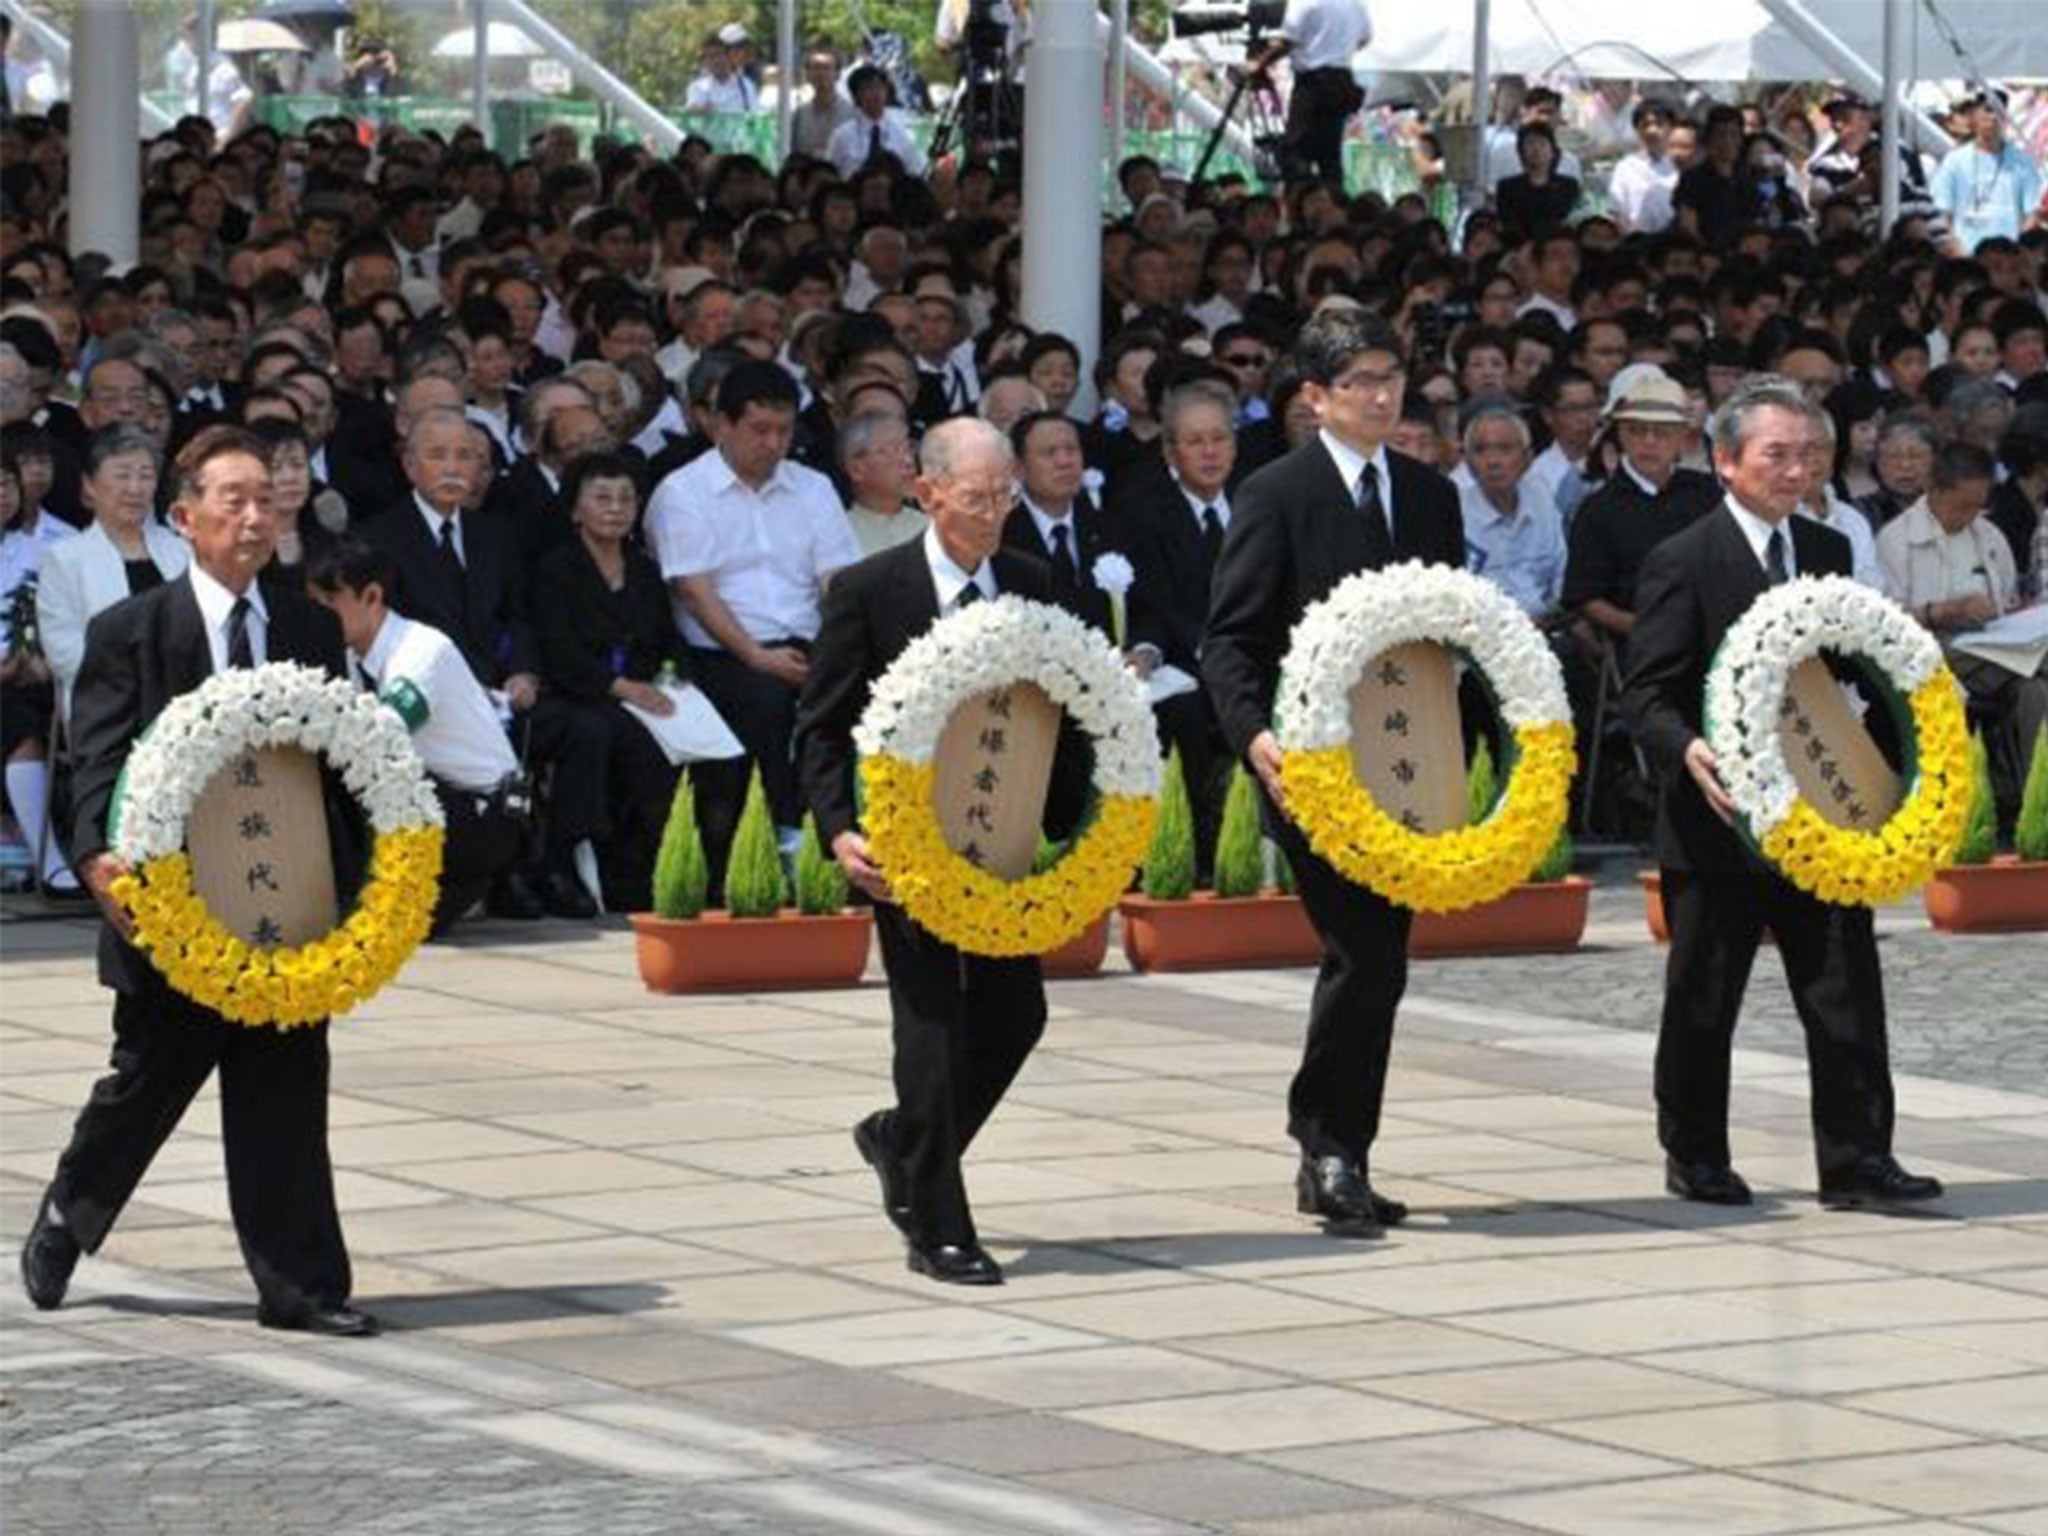 Japan marks the 70th anniversary of the atomic bombing of Nagasaki